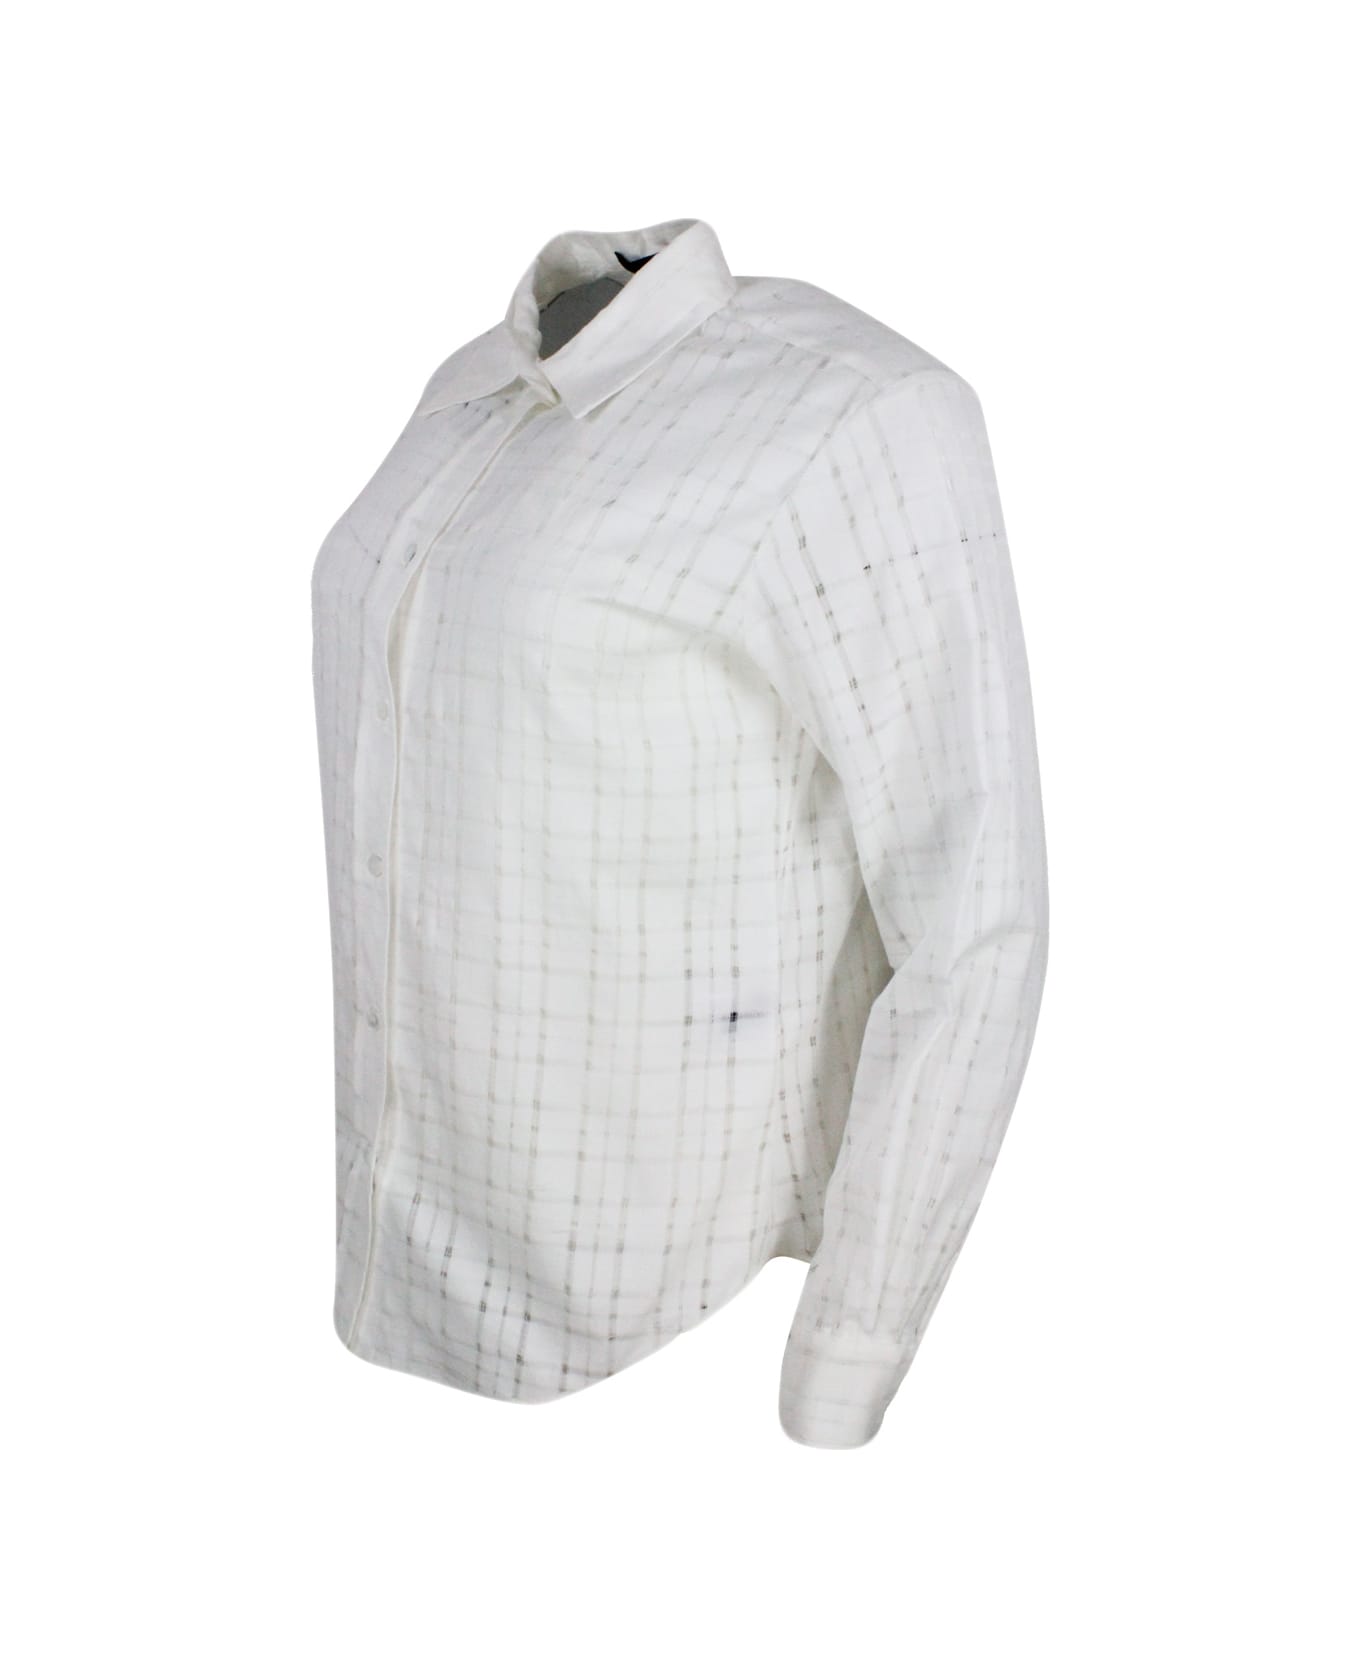 Lorena Antoniazzi Long-sleeved Shirt In Stretch Cotton With Perforated Window Work And Including Coordinated Top - cream